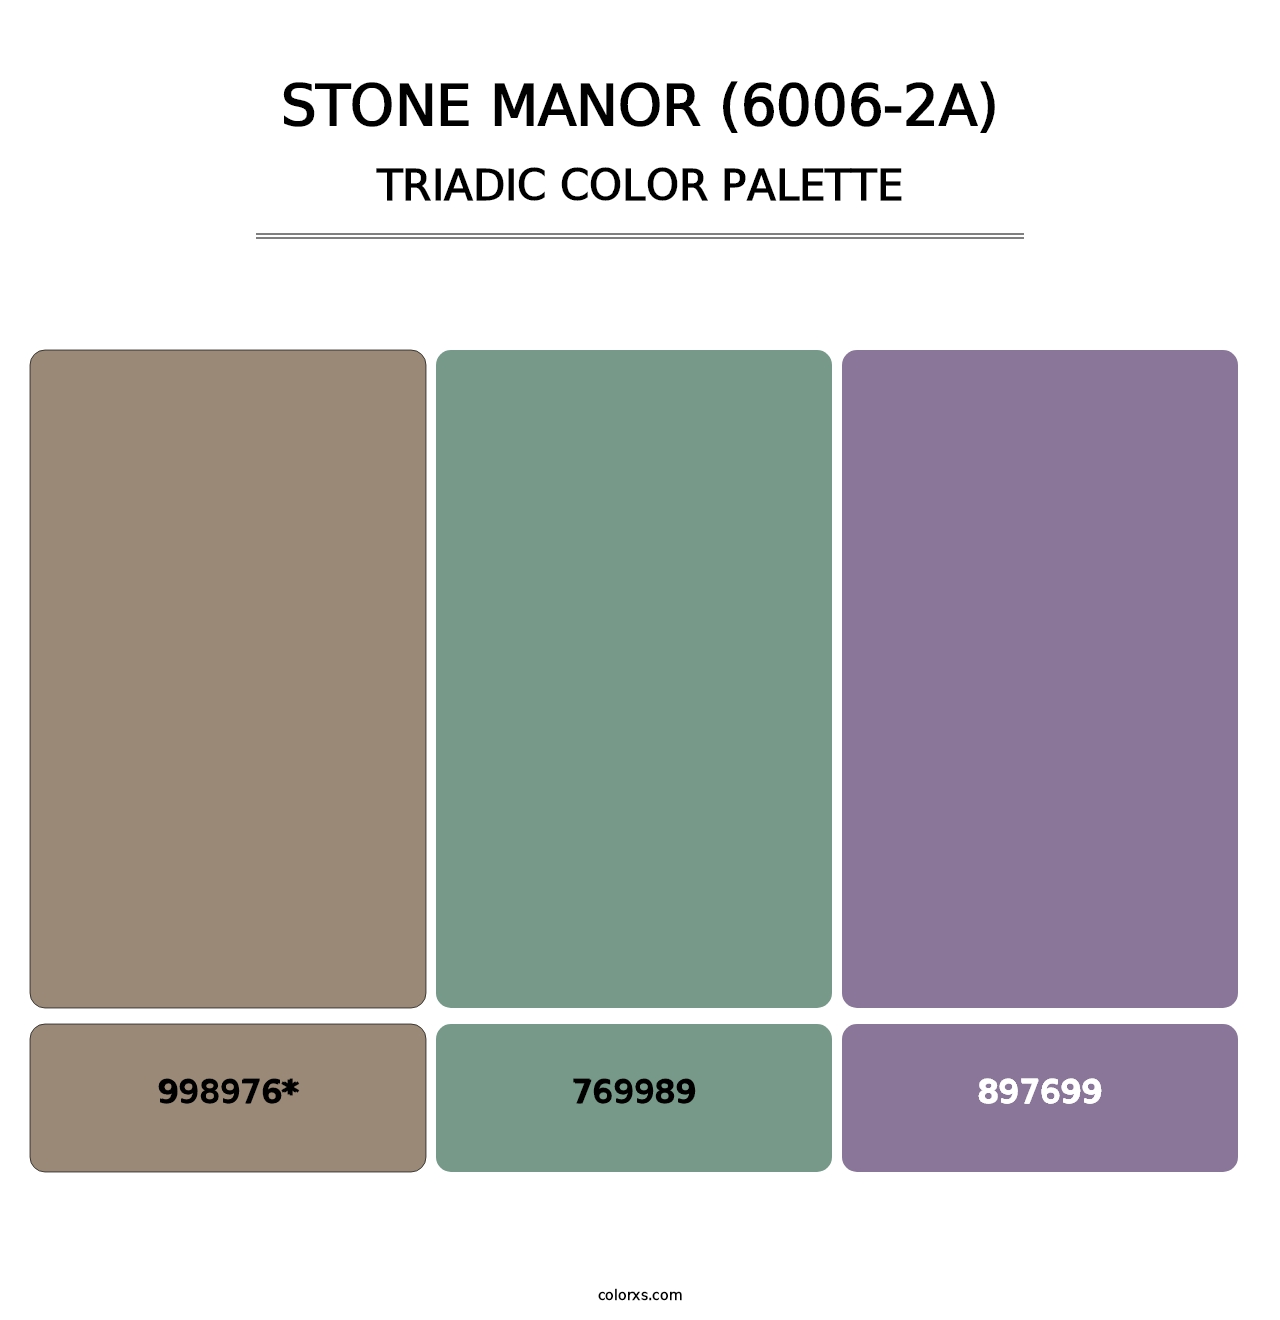 Stone Manor (6006-2A) - Triadic Color Palette